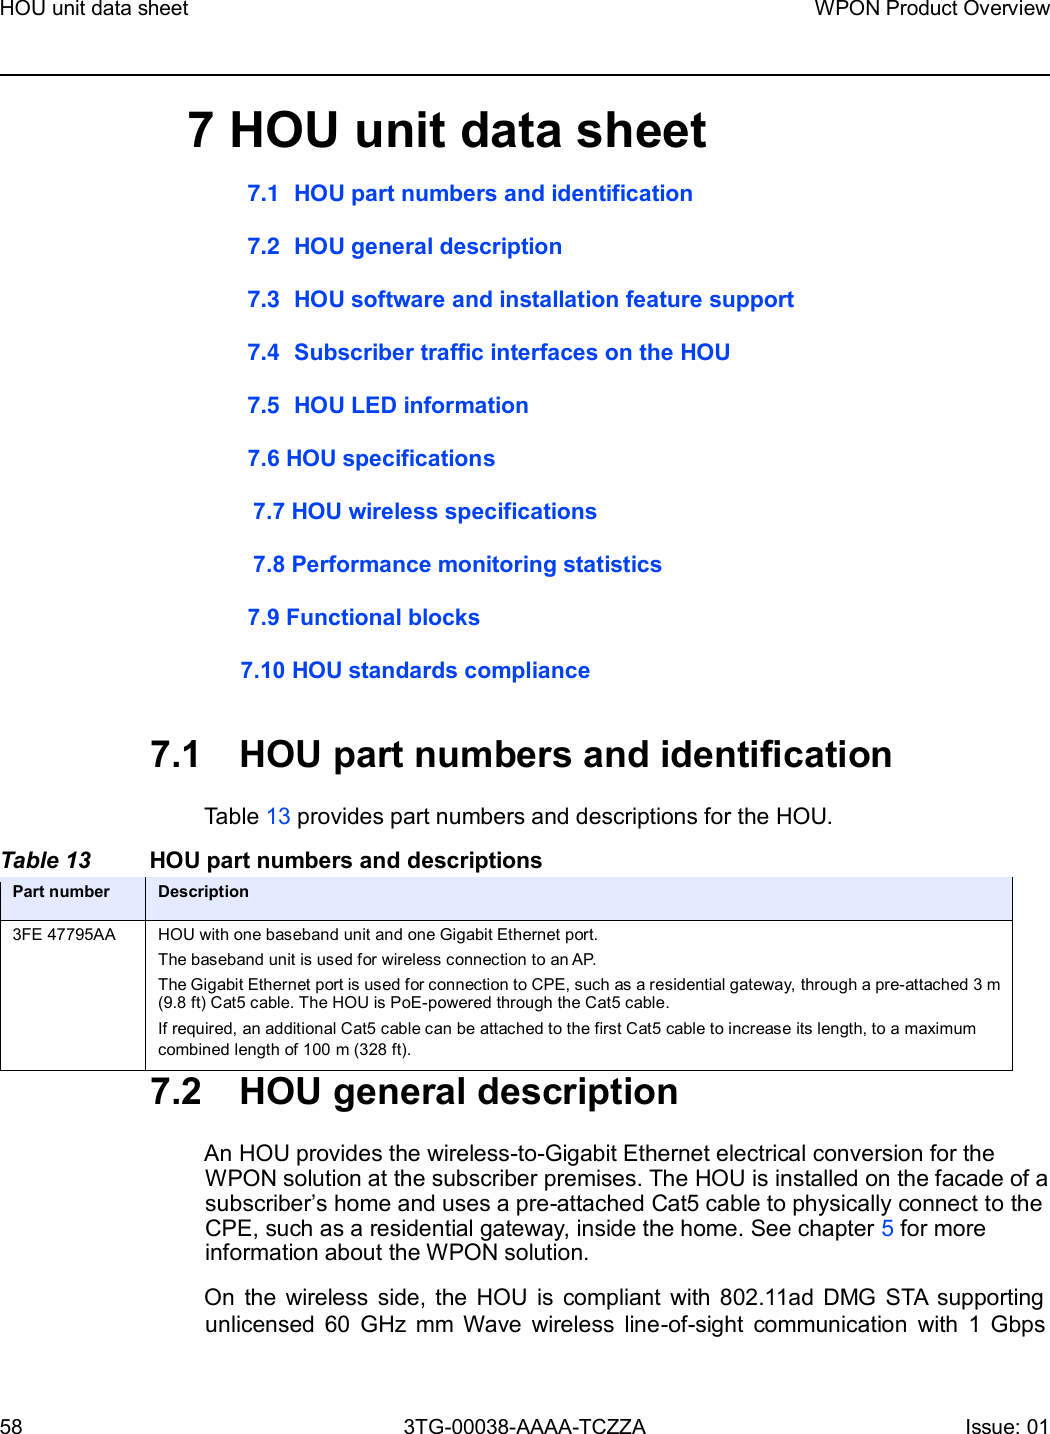 Page 58 of Nokia Bell 7577WPONAPAC WPON User Manual WPON Product Overview